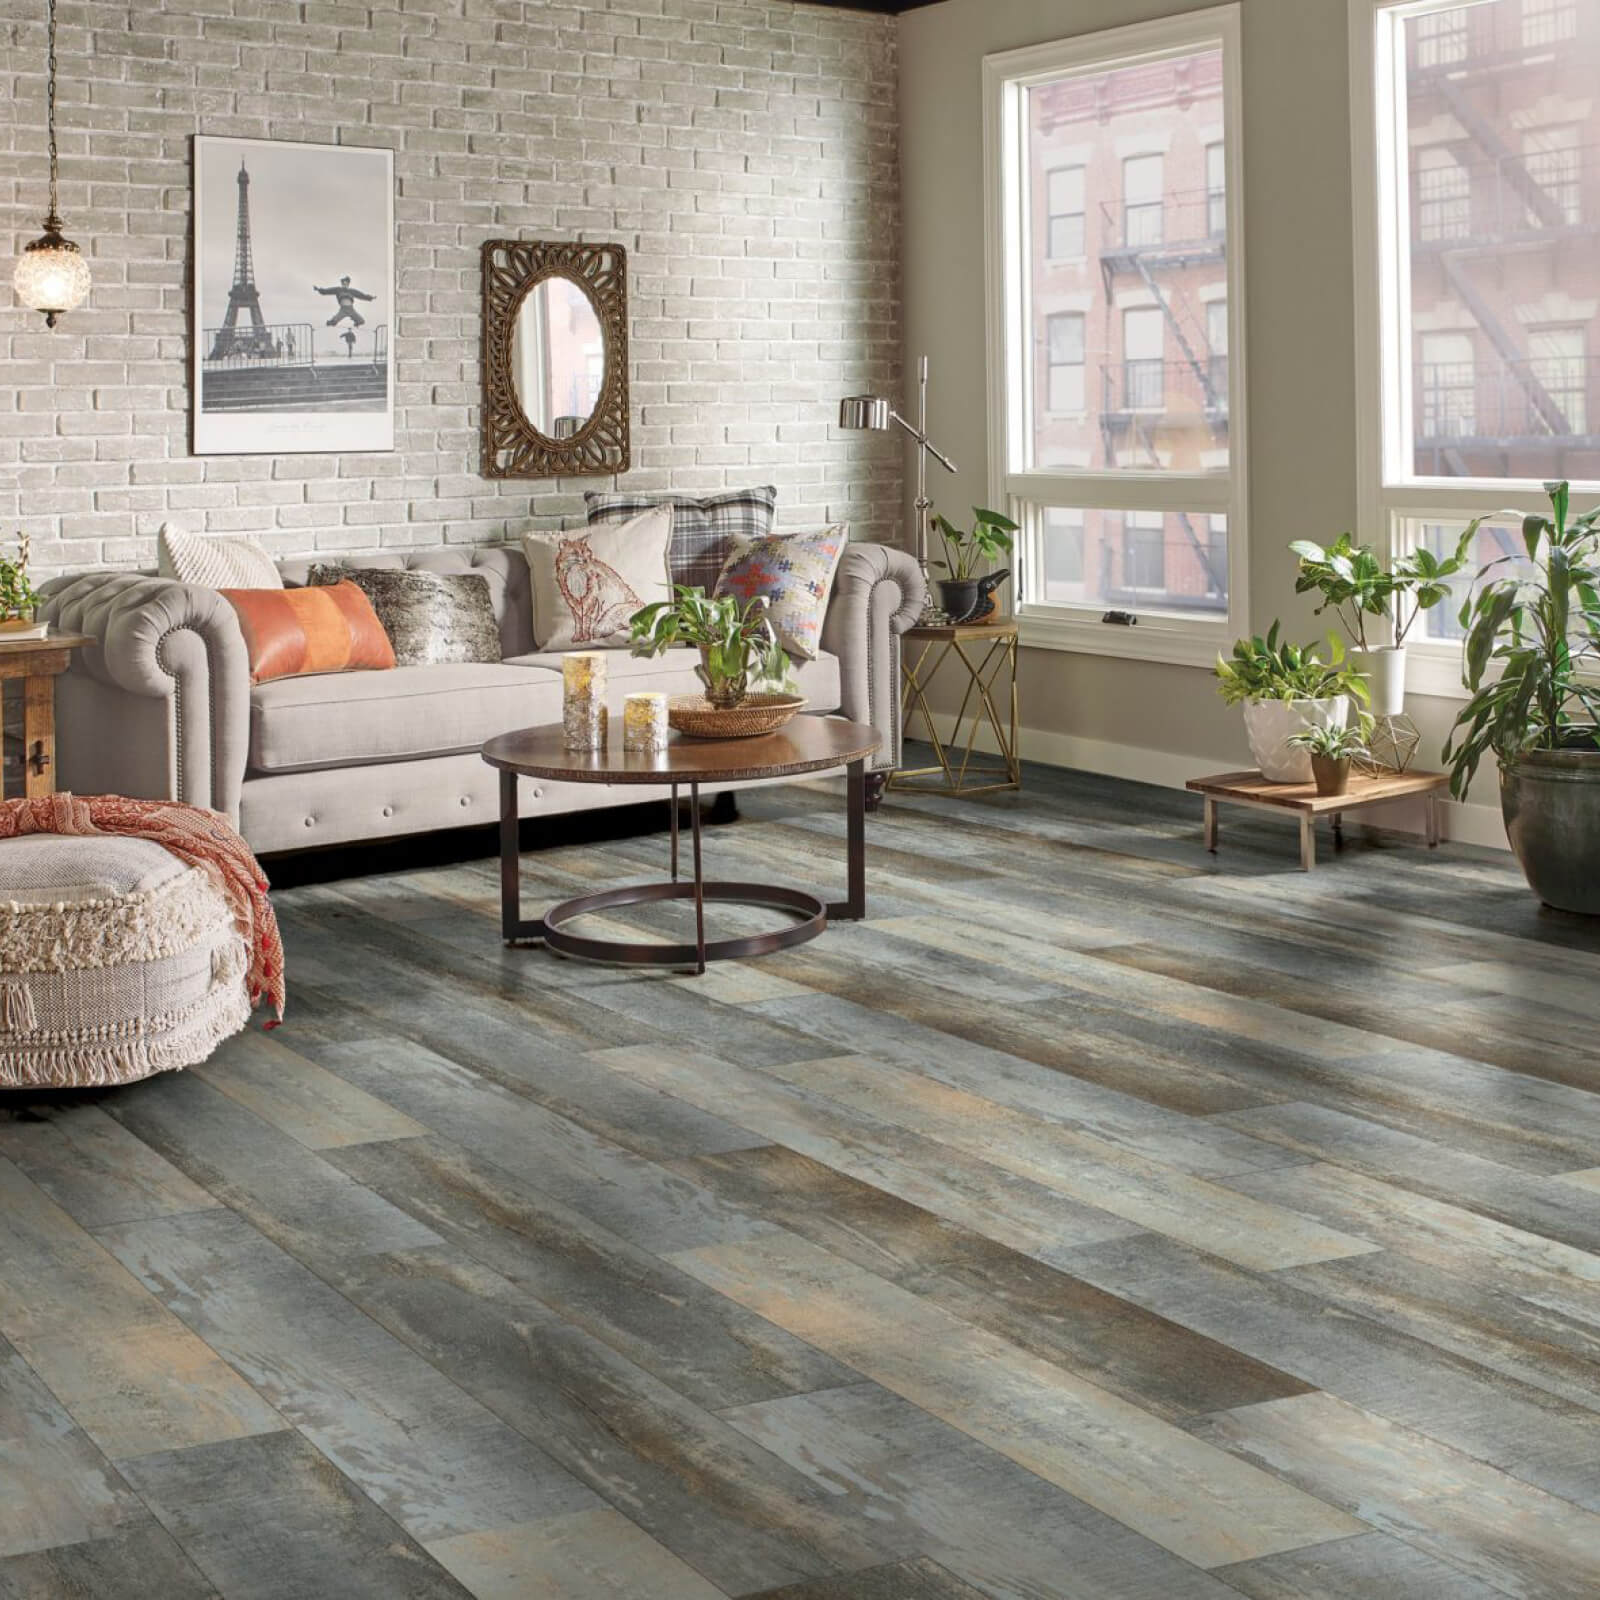 Our Favorite Flooring Trends For Summer 2021, Paneling Factory Of Virginia DBA Cabinet Factory